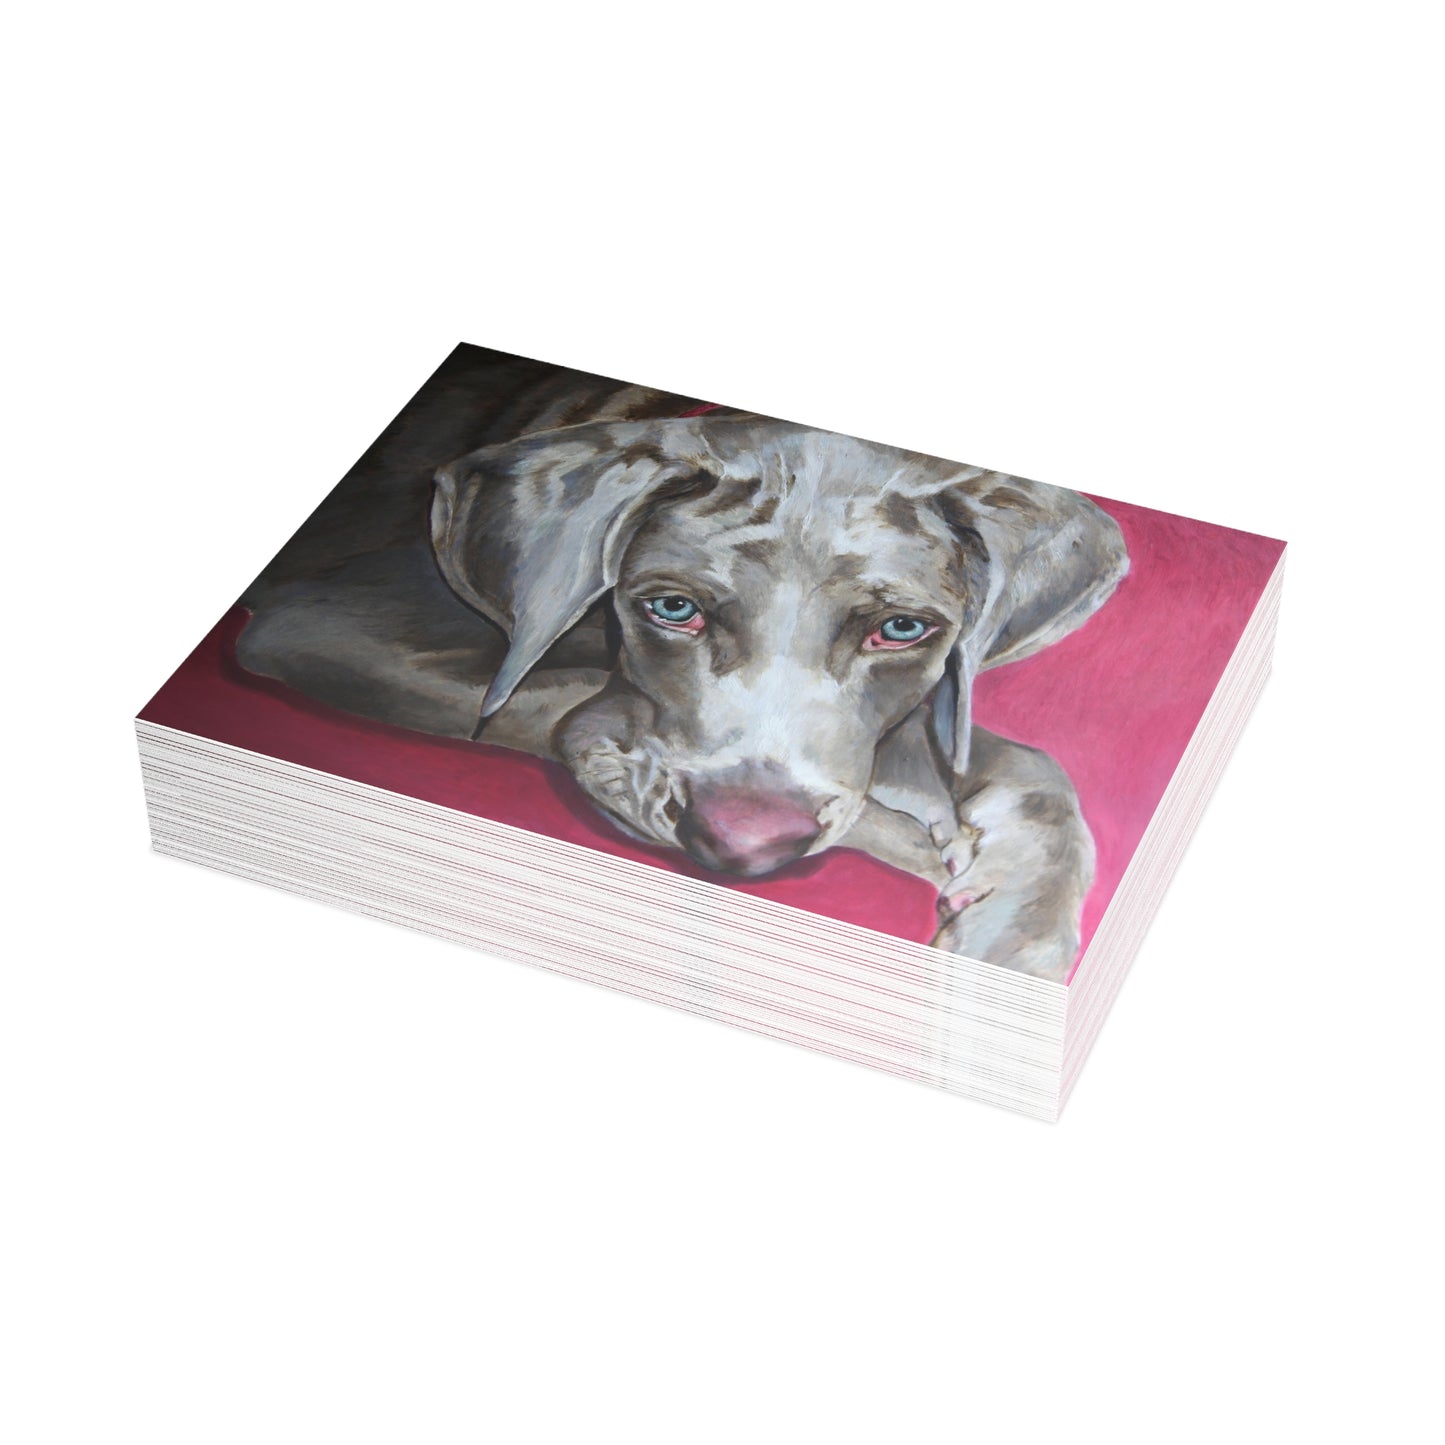 Weimaraner Greeting Card - Folded Greeting Cards (1, 10, 30, and 50pcs)